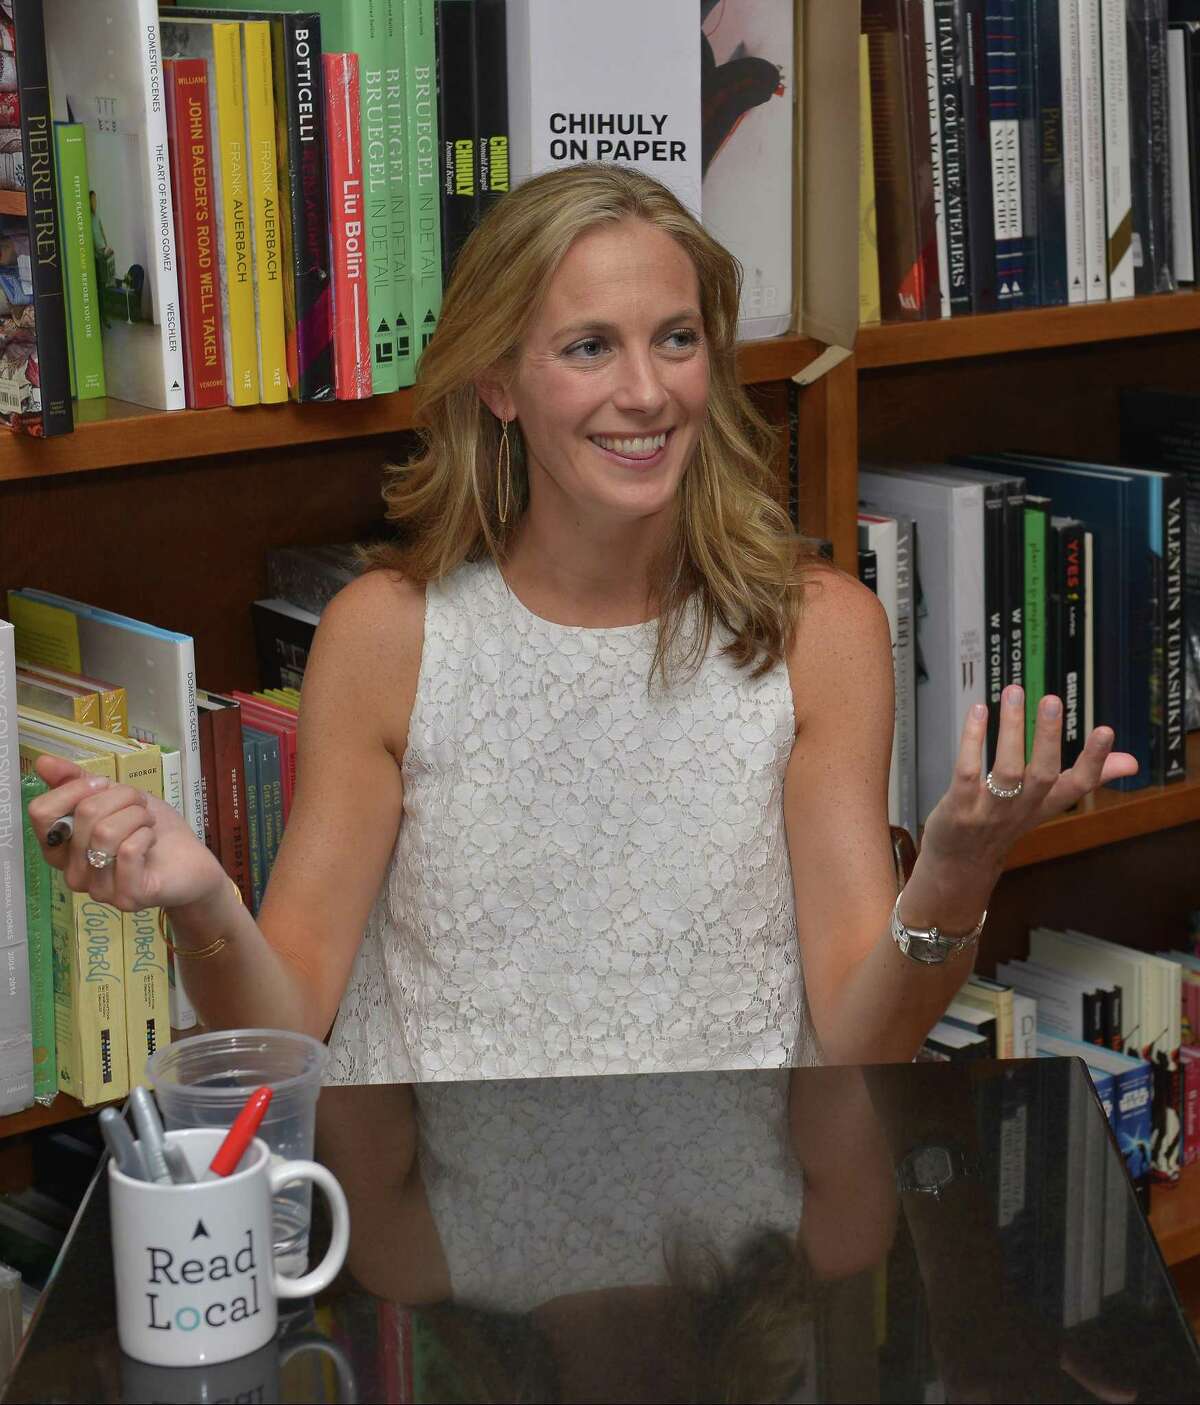 Connecticut author Lauren Weisberger has a new book coming out, “When Life Gives You Lululemons,” set in Greenwich.